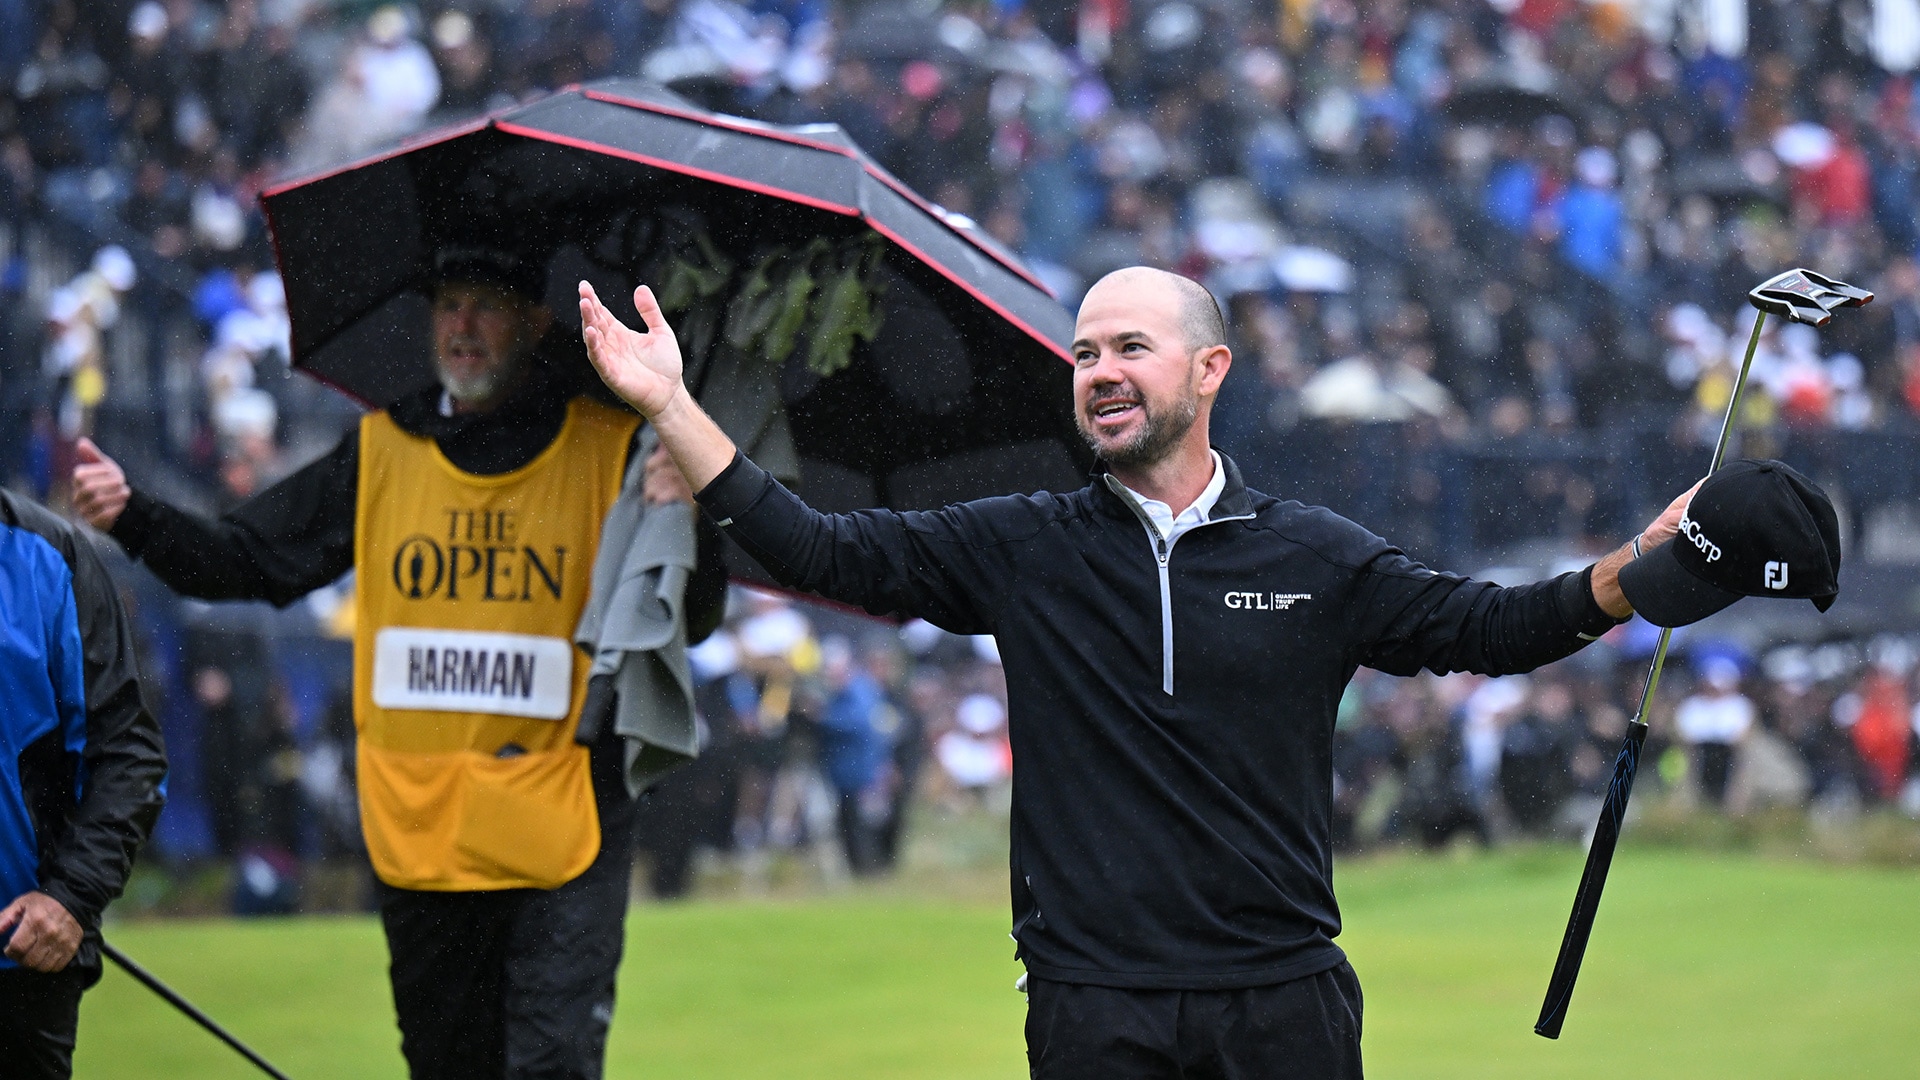 2023 British Open: Unwavering, unbeatable, Brian Harman meets the moment at The Open